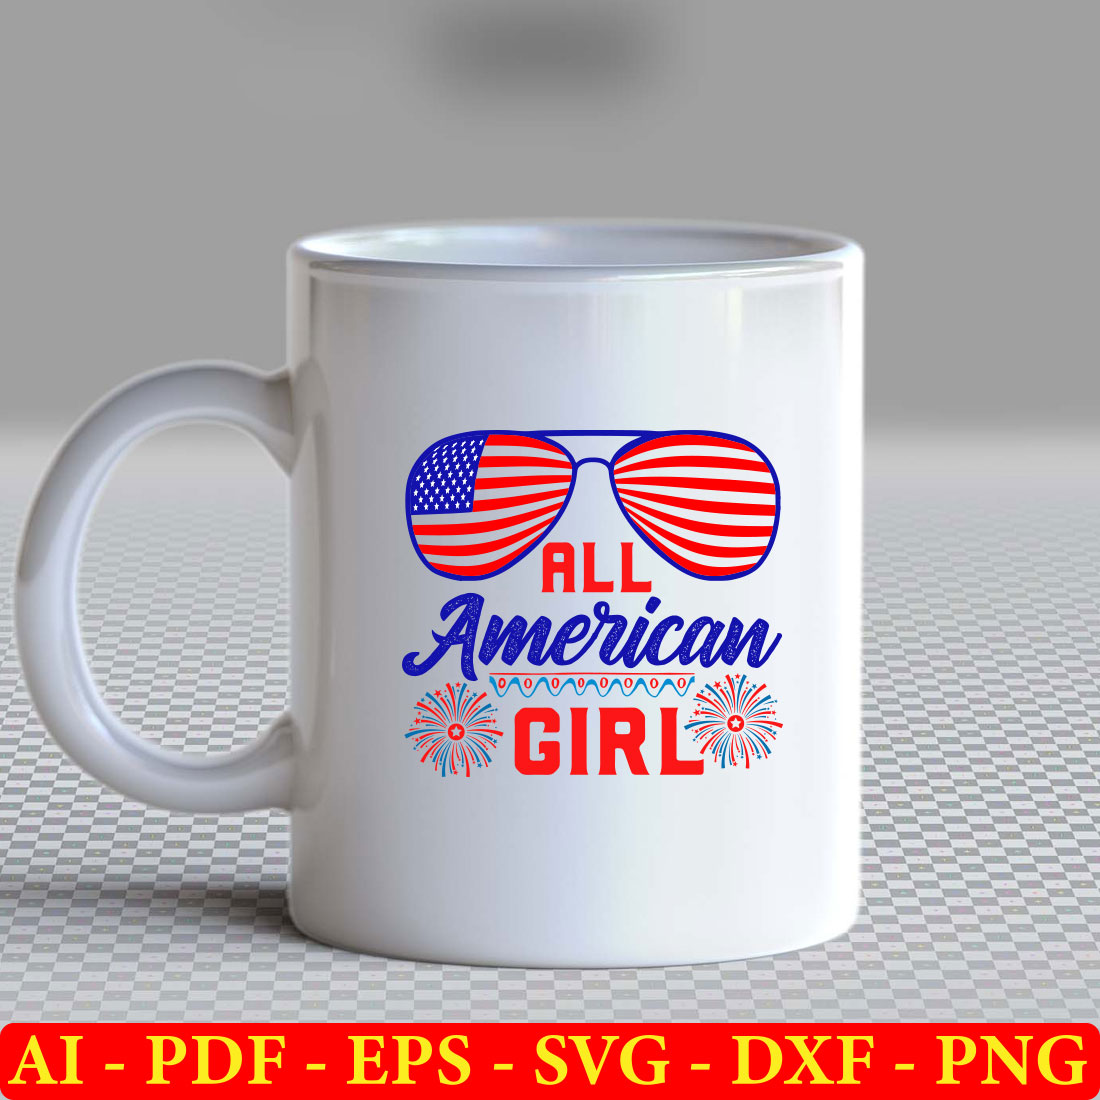 White coffee mug with the words all american girl on it.